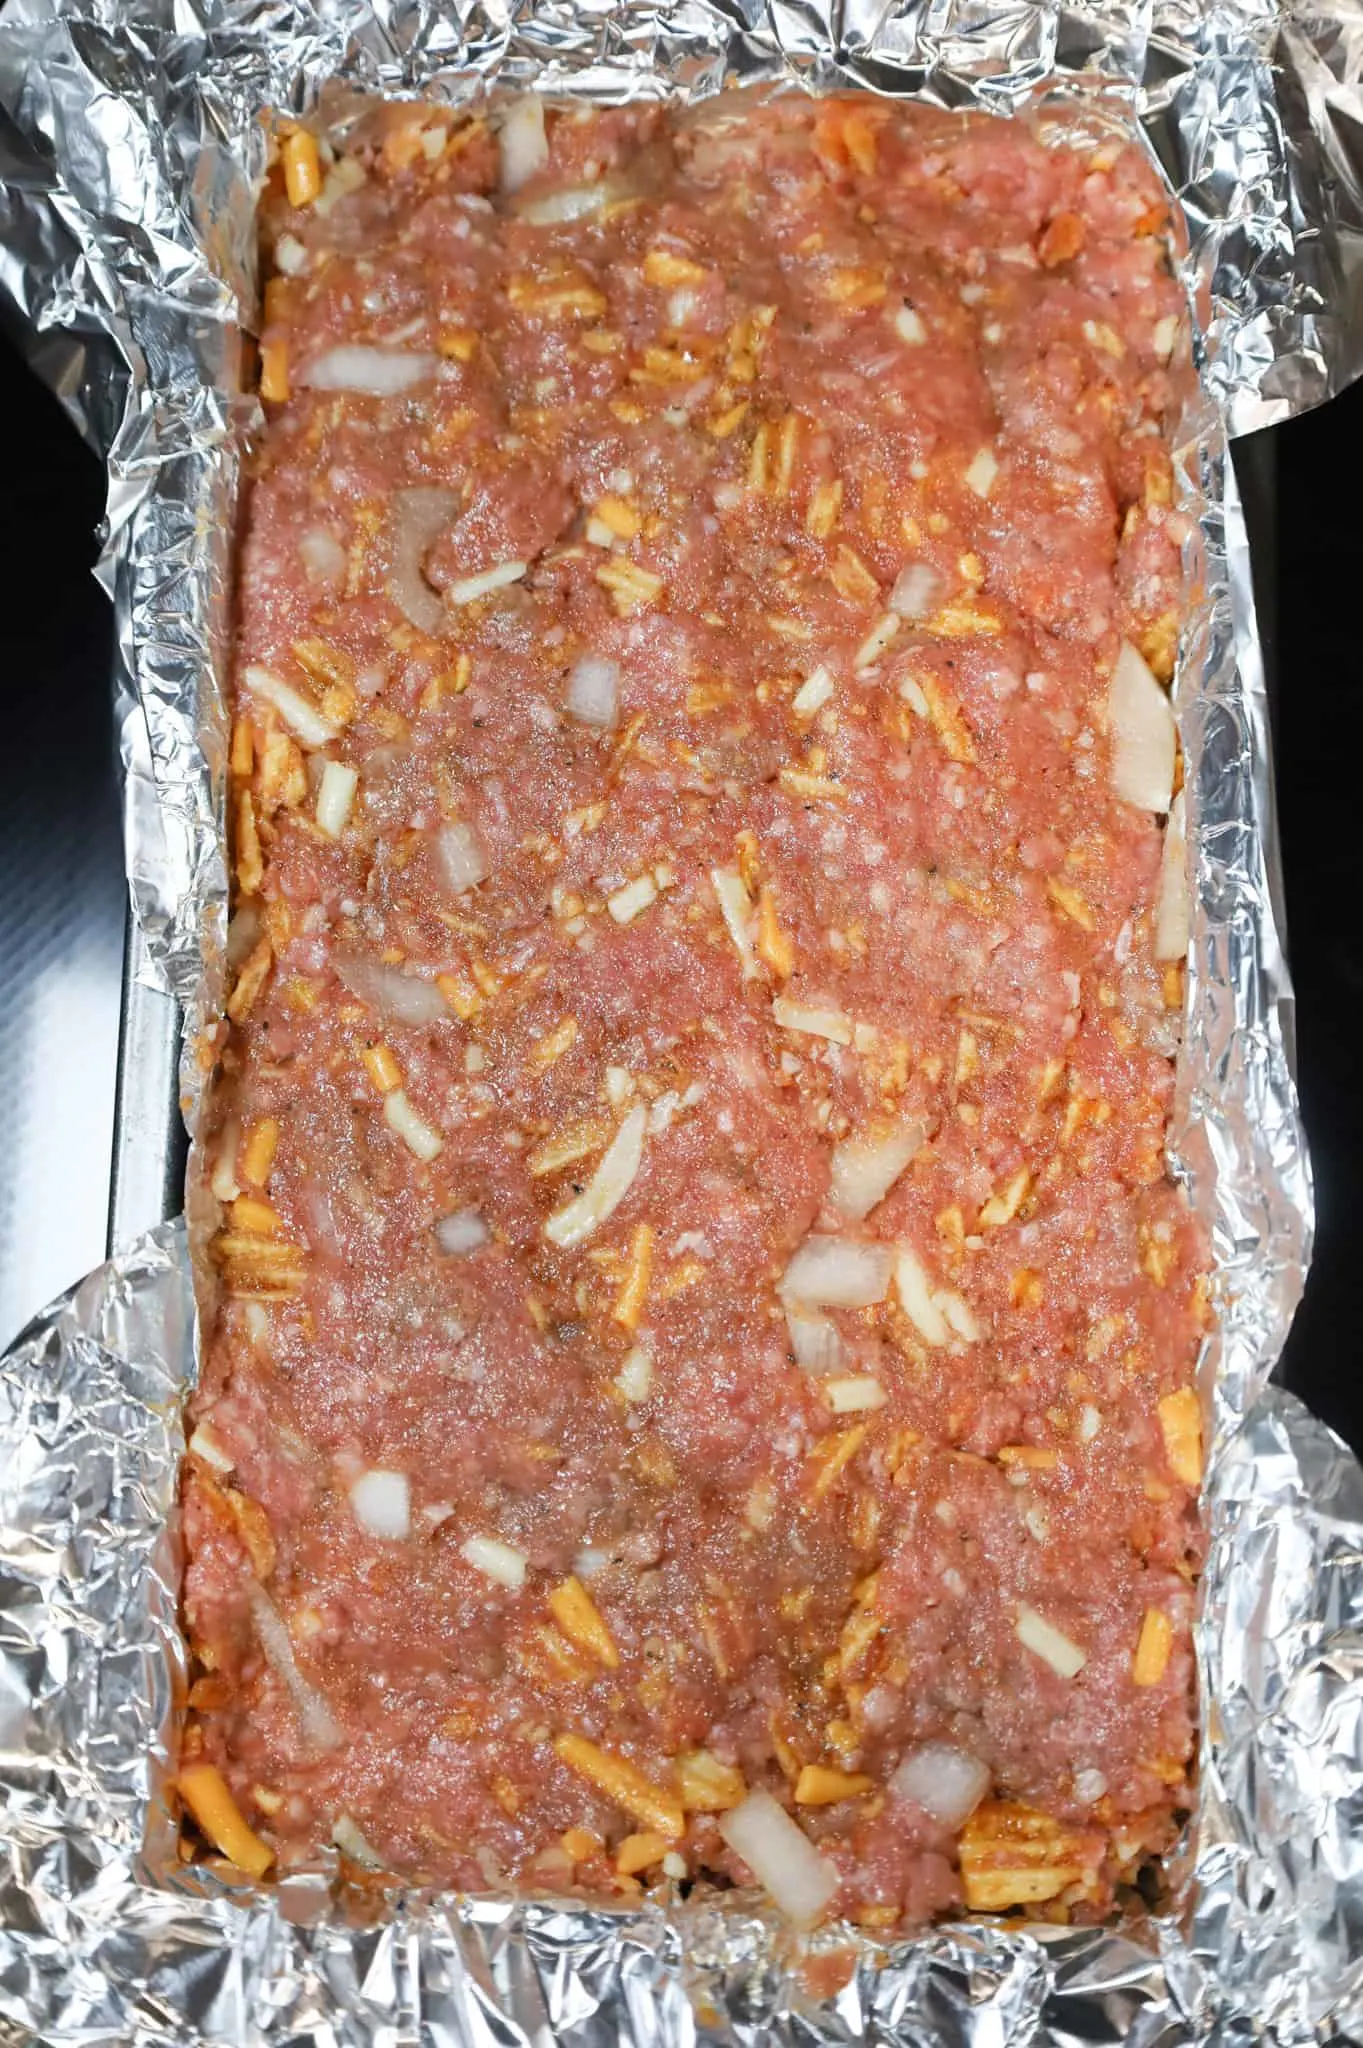 meatloaf mixture in a foil lined pan before baking